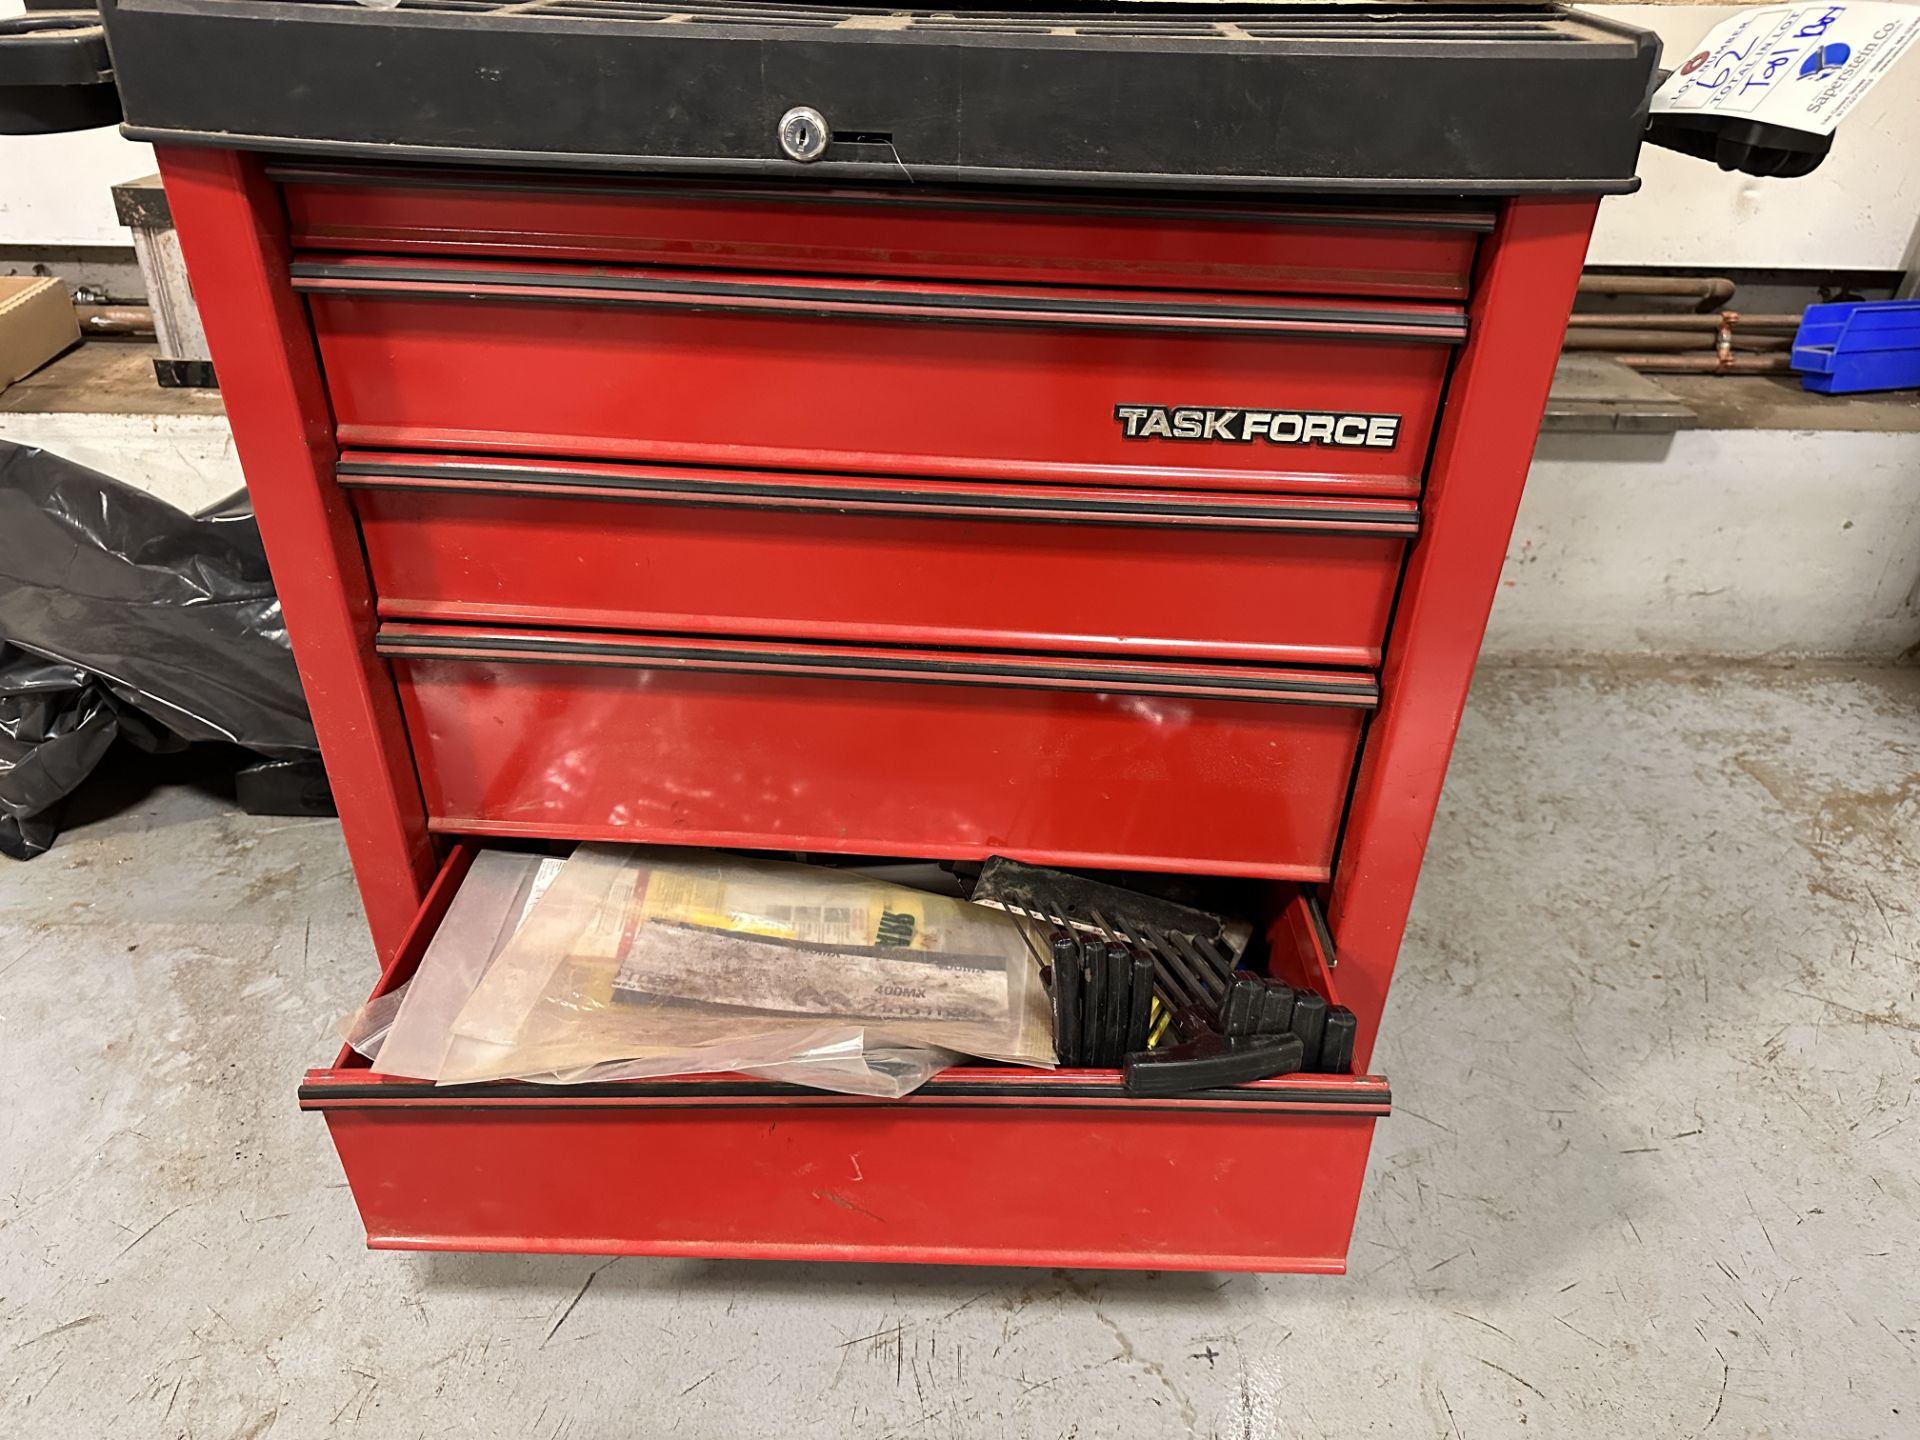 Task Force Tool Box w/Contents (See Pics)